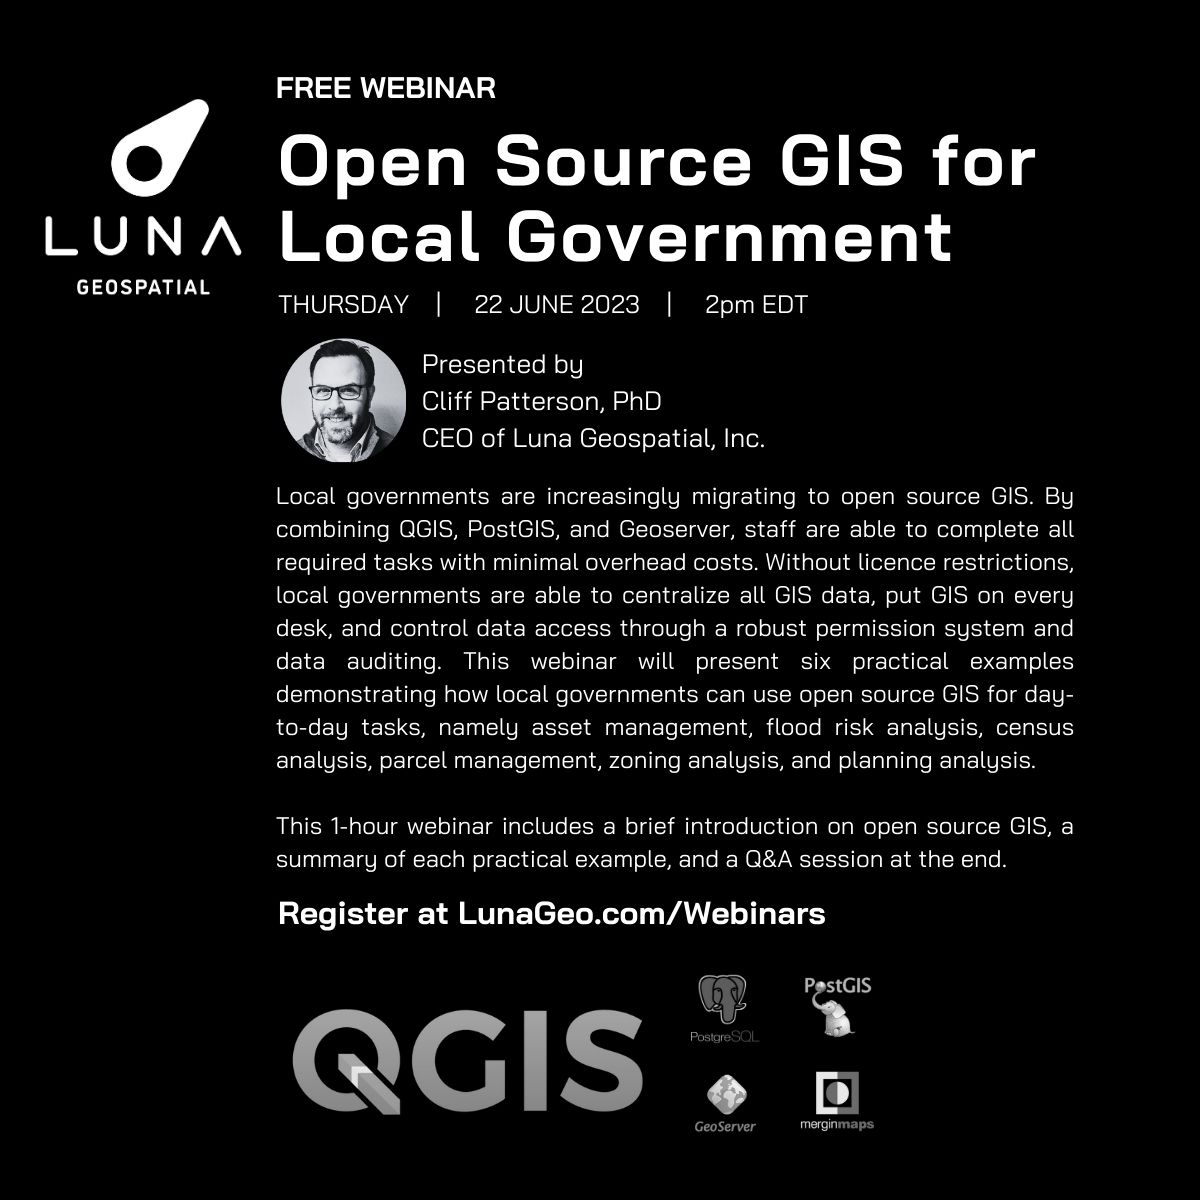 Open Source GIS for Local Government: 6 practical examples, a free webinar presented by Cliff Patterson @cliffpat, is on Thursday, June 22 at 2pm EDT. Register now for the webinar as space is limited. lunageo.com/webinar/open-s…